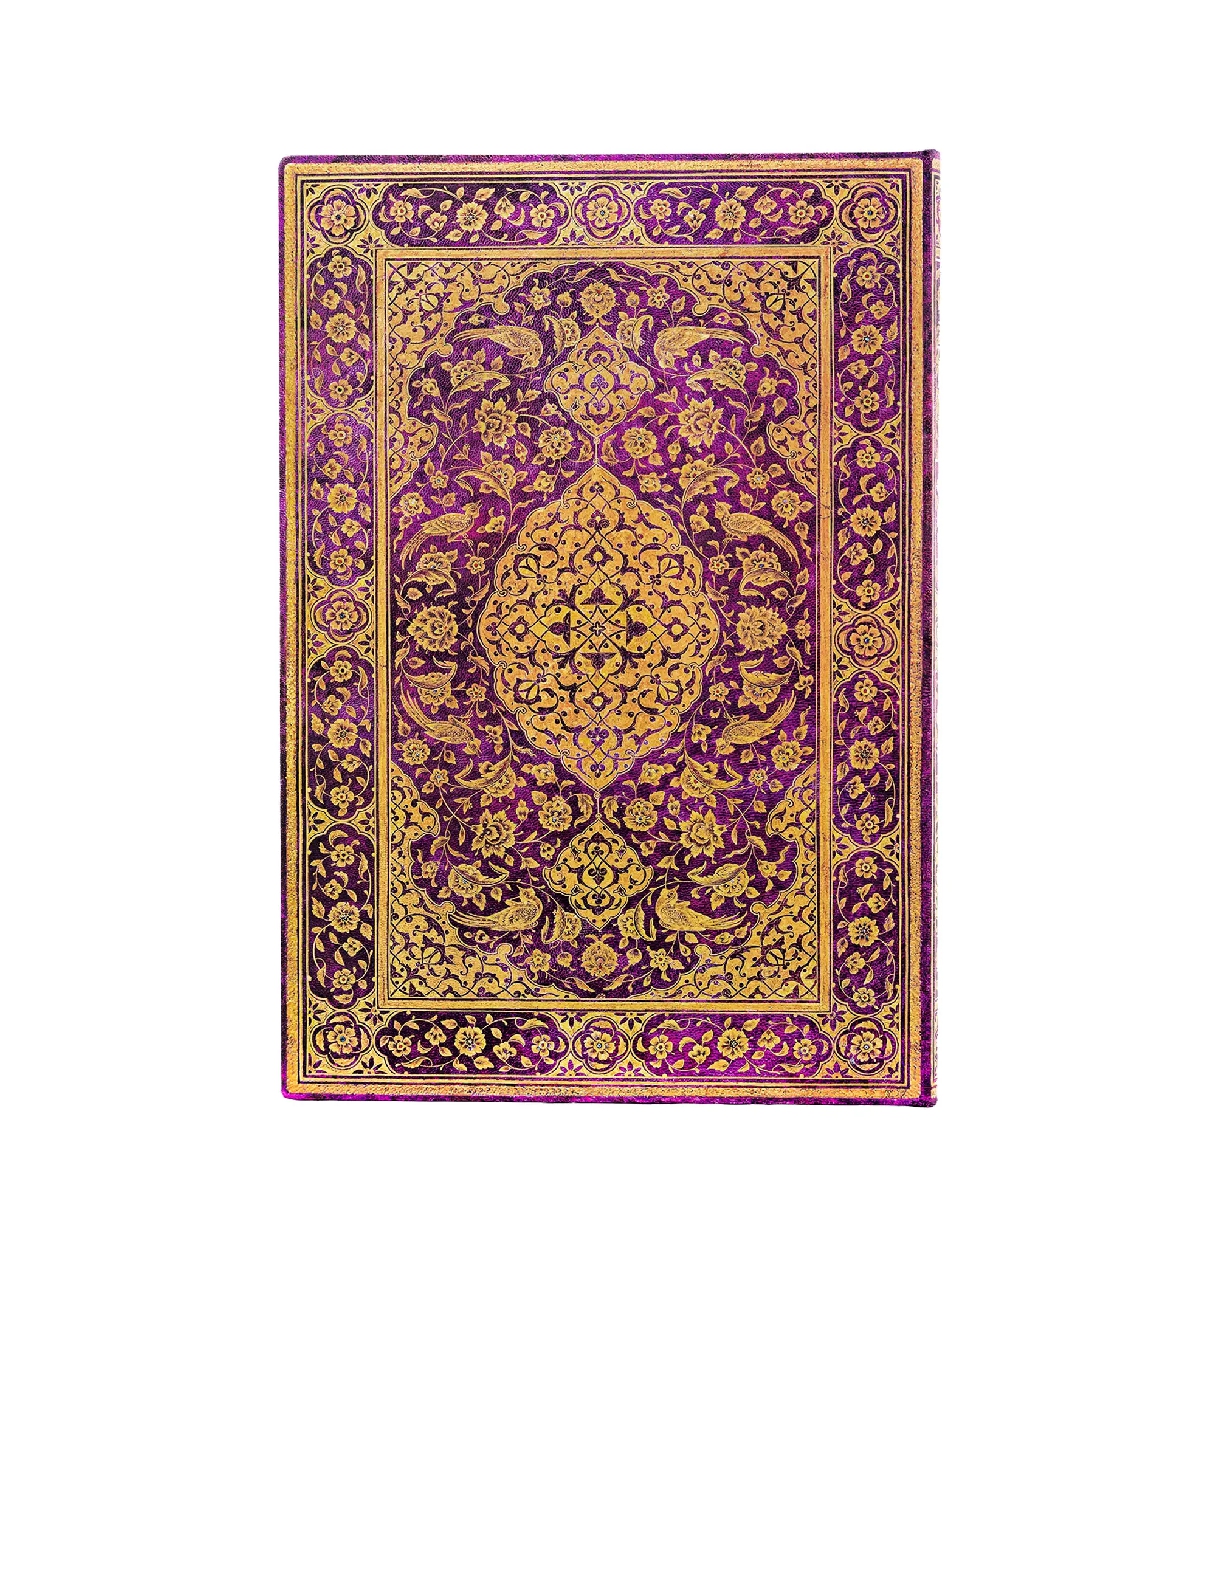 The Orchard, Persian Poetry, Hardcover Journals, Grande, Unlined, Elastic Band, 128 Pg, 120 GSM